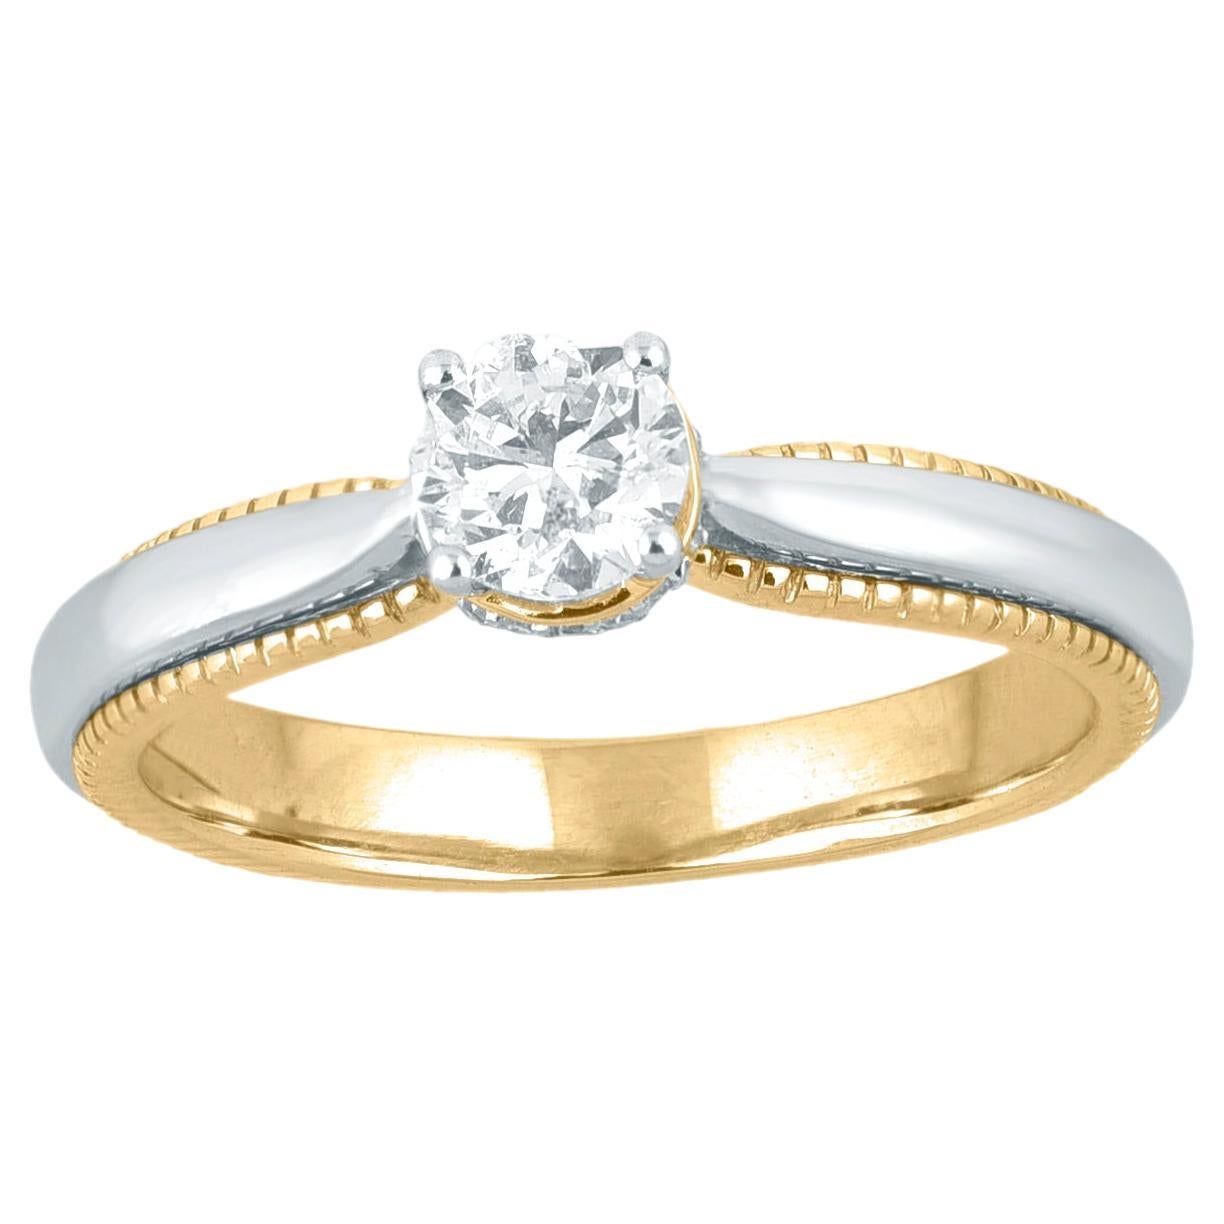 TJD 0.50 Carat Round Diamond 18KT Two-Tone Gold Solitaire Engagement Ring